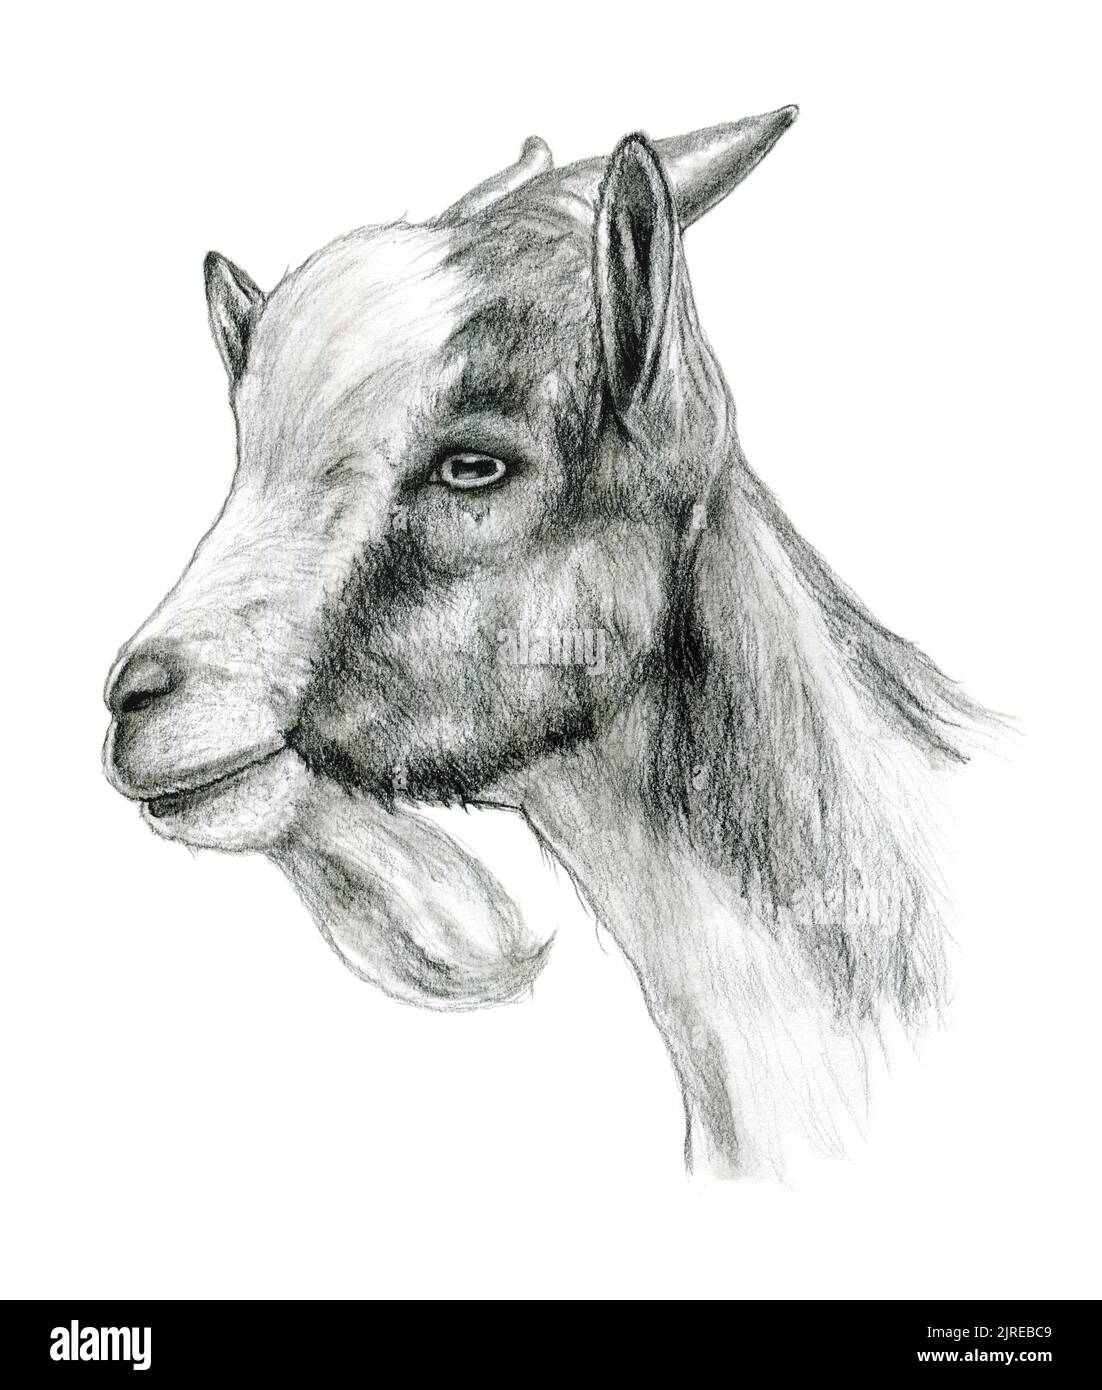 Pencil drawing of a goat's head. Traditional illustration on paper. Stock Photo